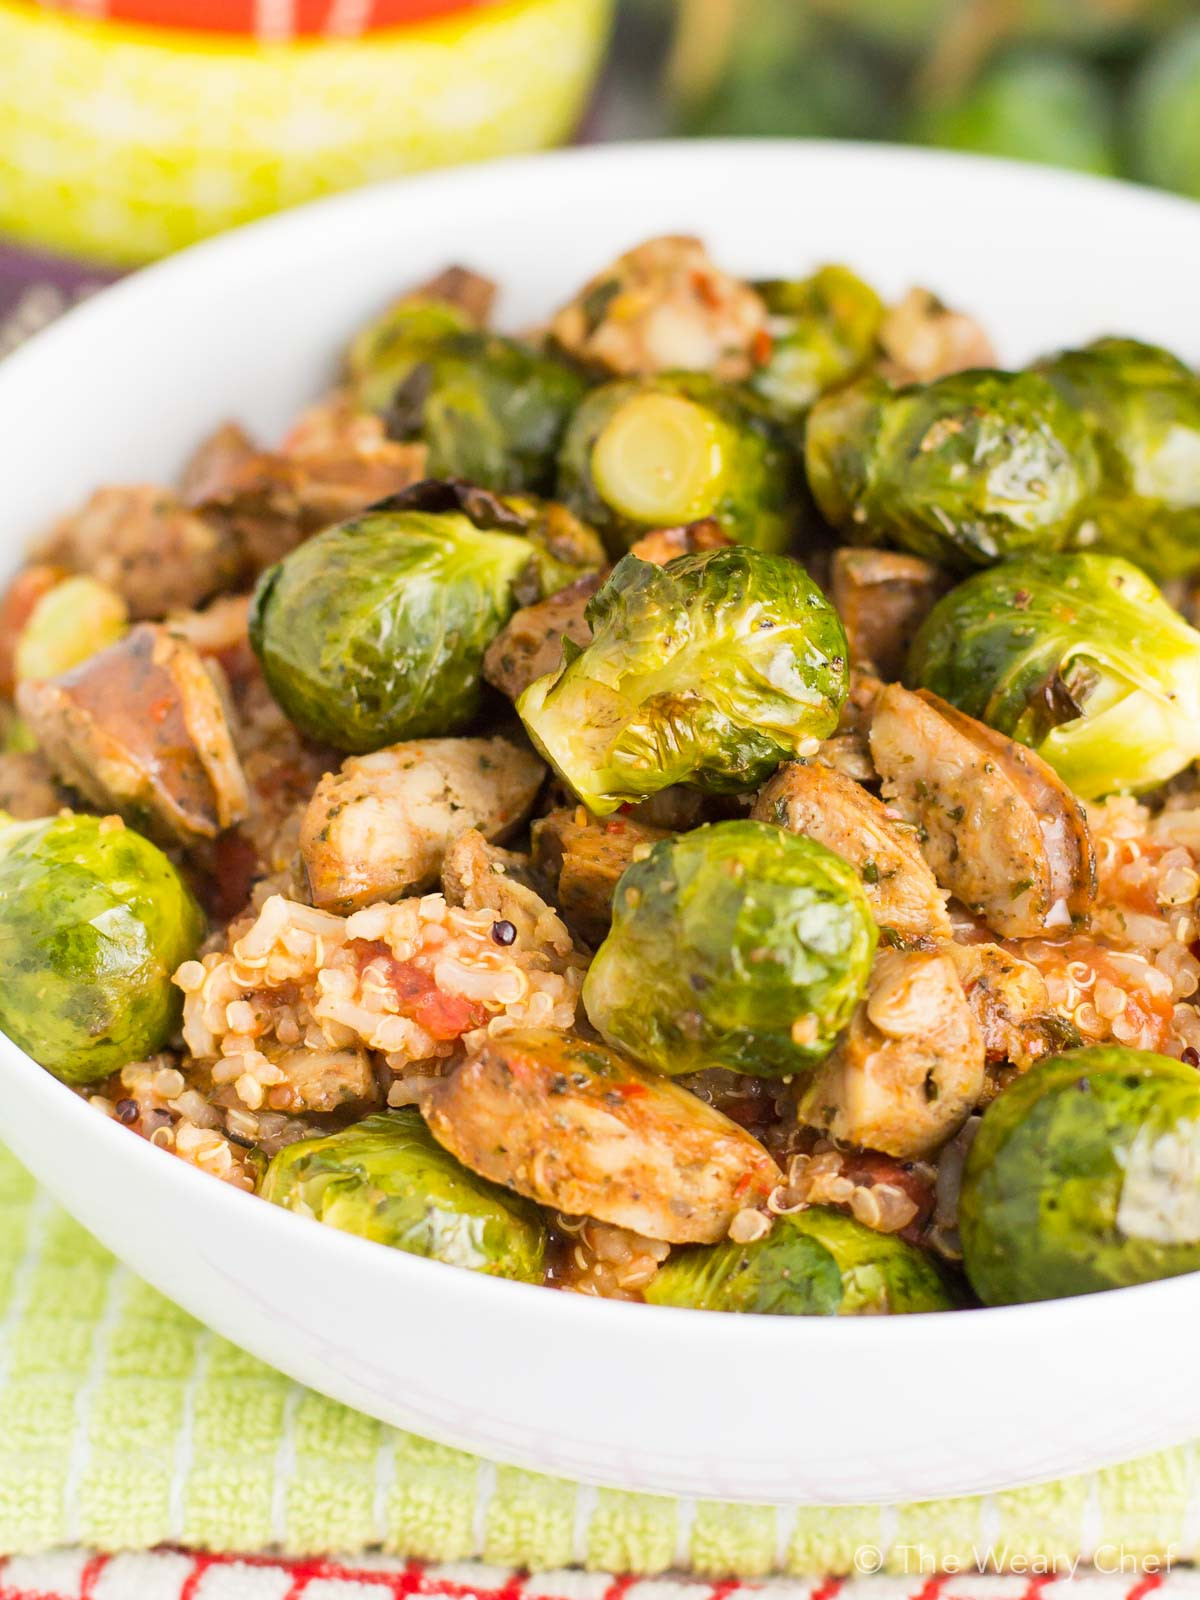 Quinoa Dinner Ideas
 30 Minute Quinoa Recipe with Sausage and Brussels Sprouts